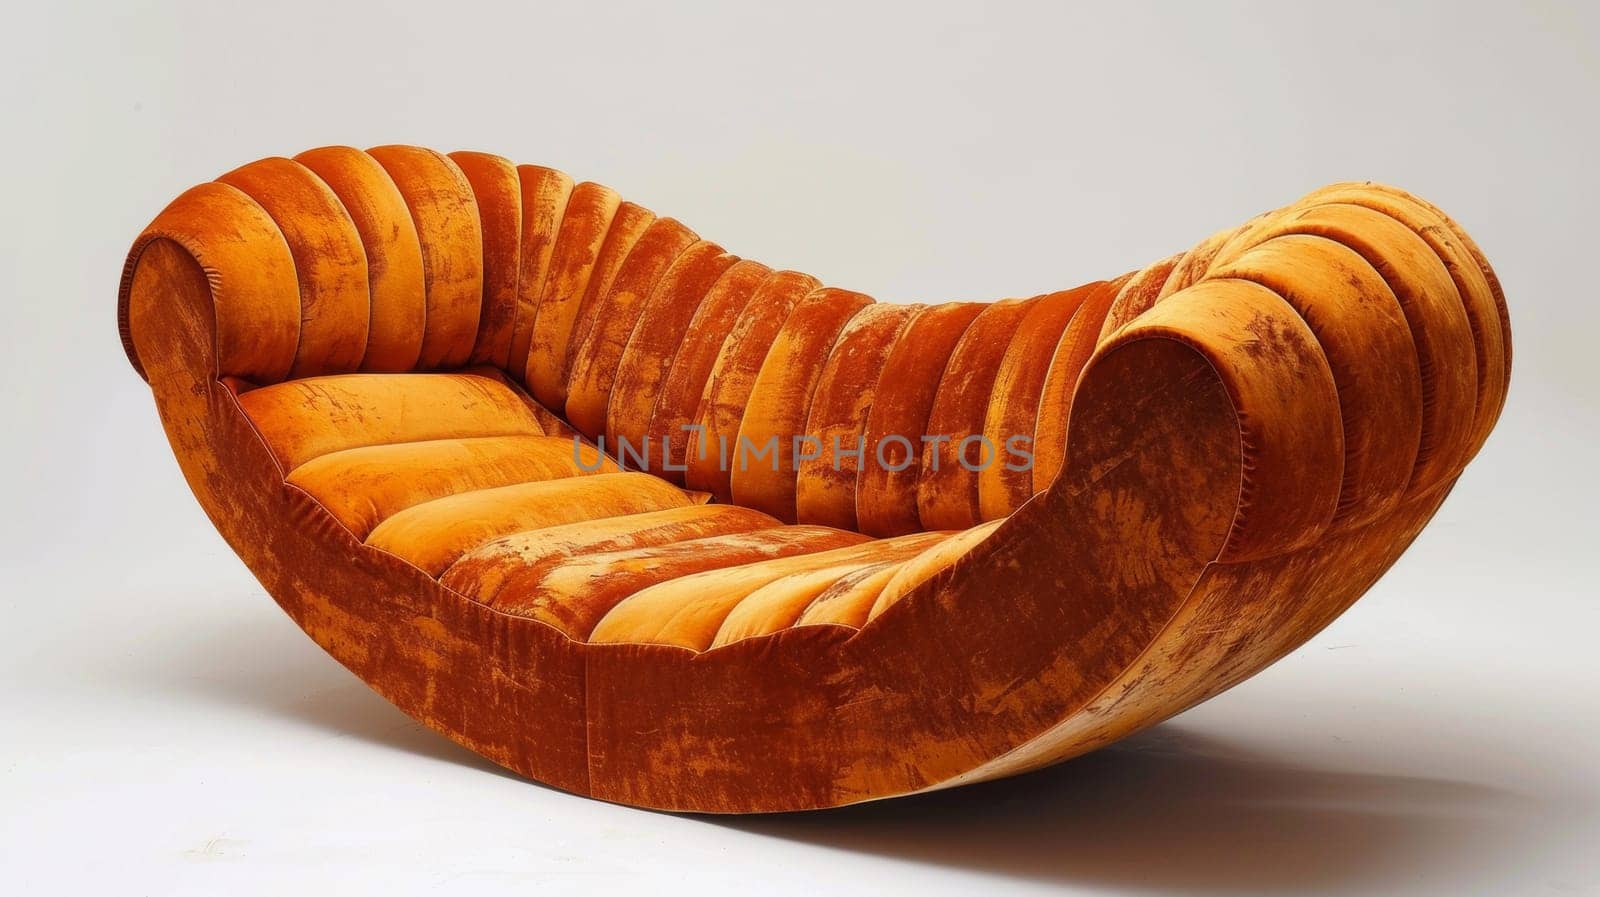 A curved chair with orange and brown stripes on the seat